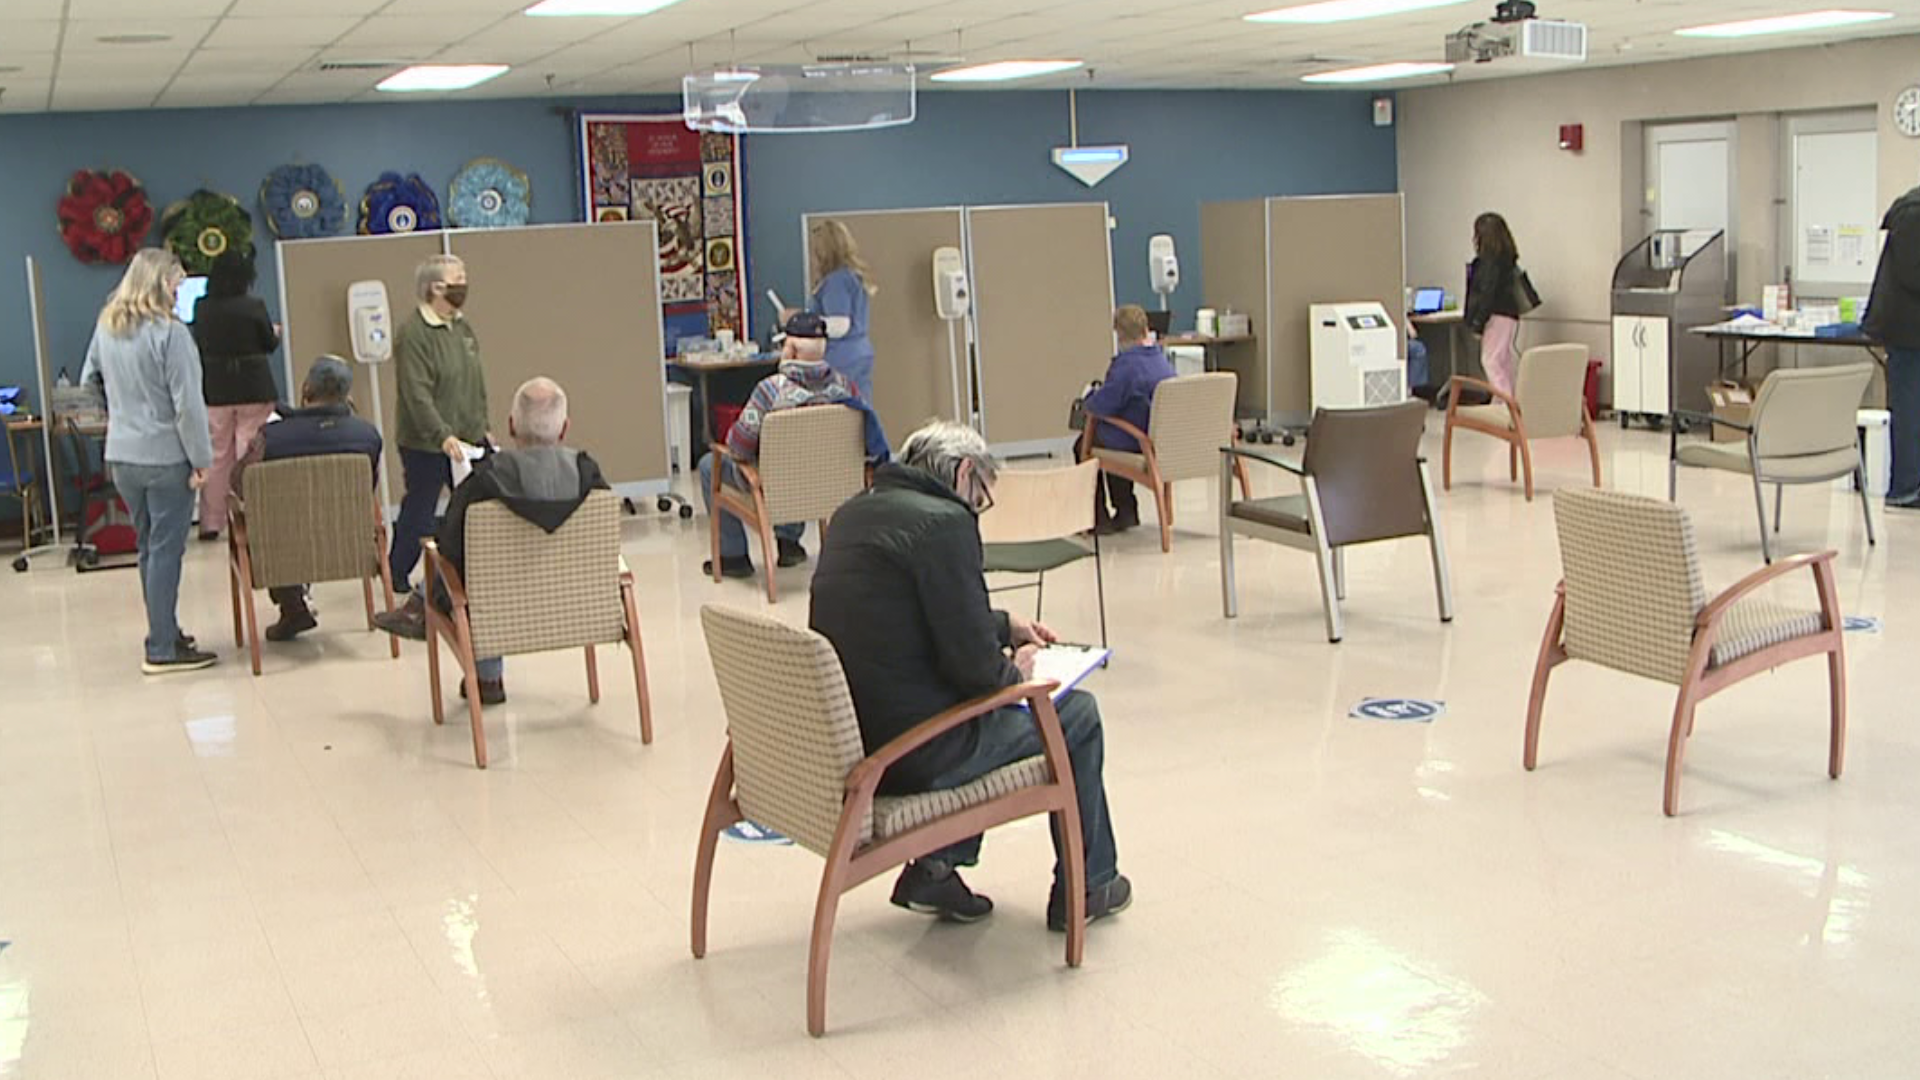 More than one hundred vets stopped by Saturday's vaccination clinic.